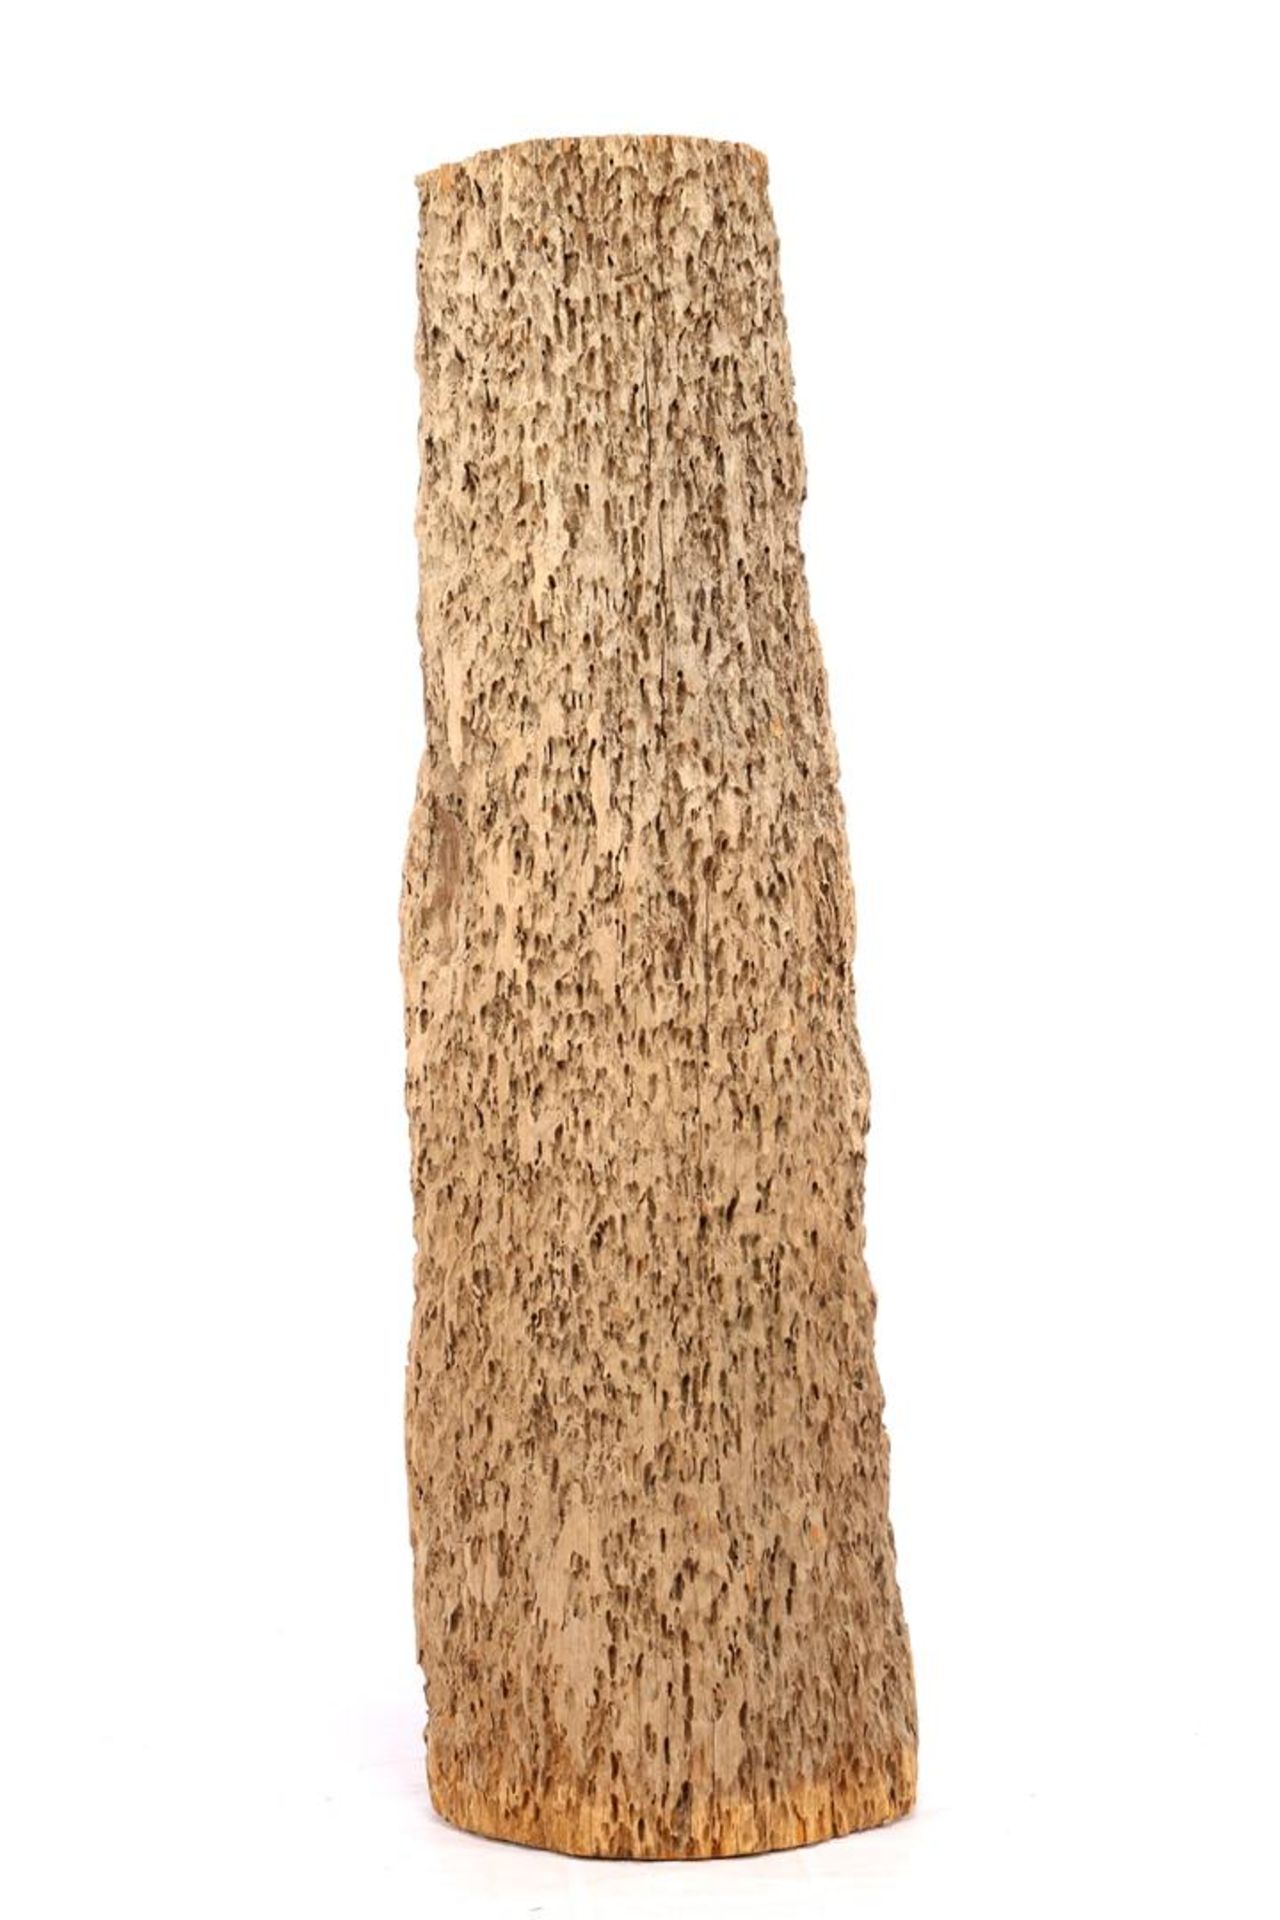 Wooden mussel pole, 152 cm high and 30-40 cm in diameter - Image 2 of 2